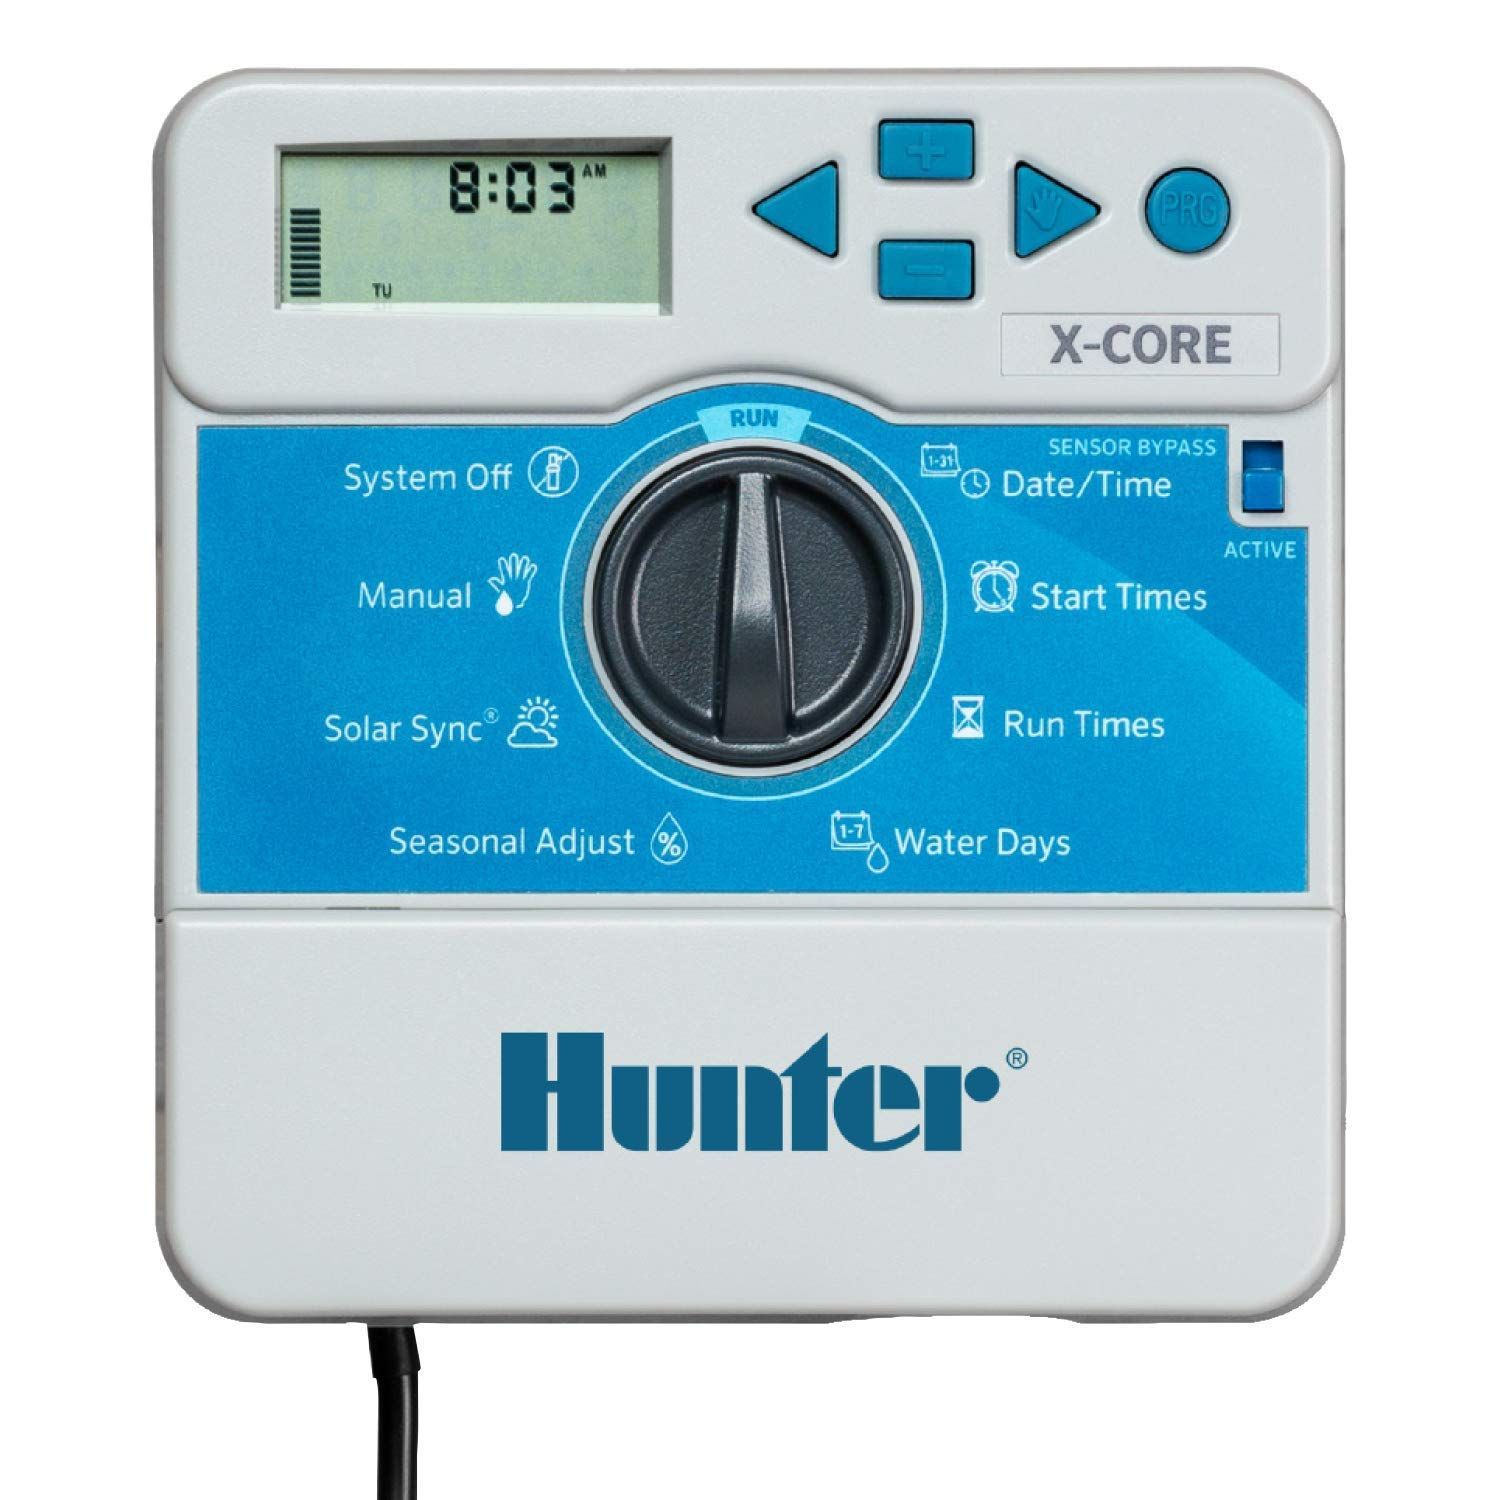 a hunter x-core irrigation controller is shown on a white background